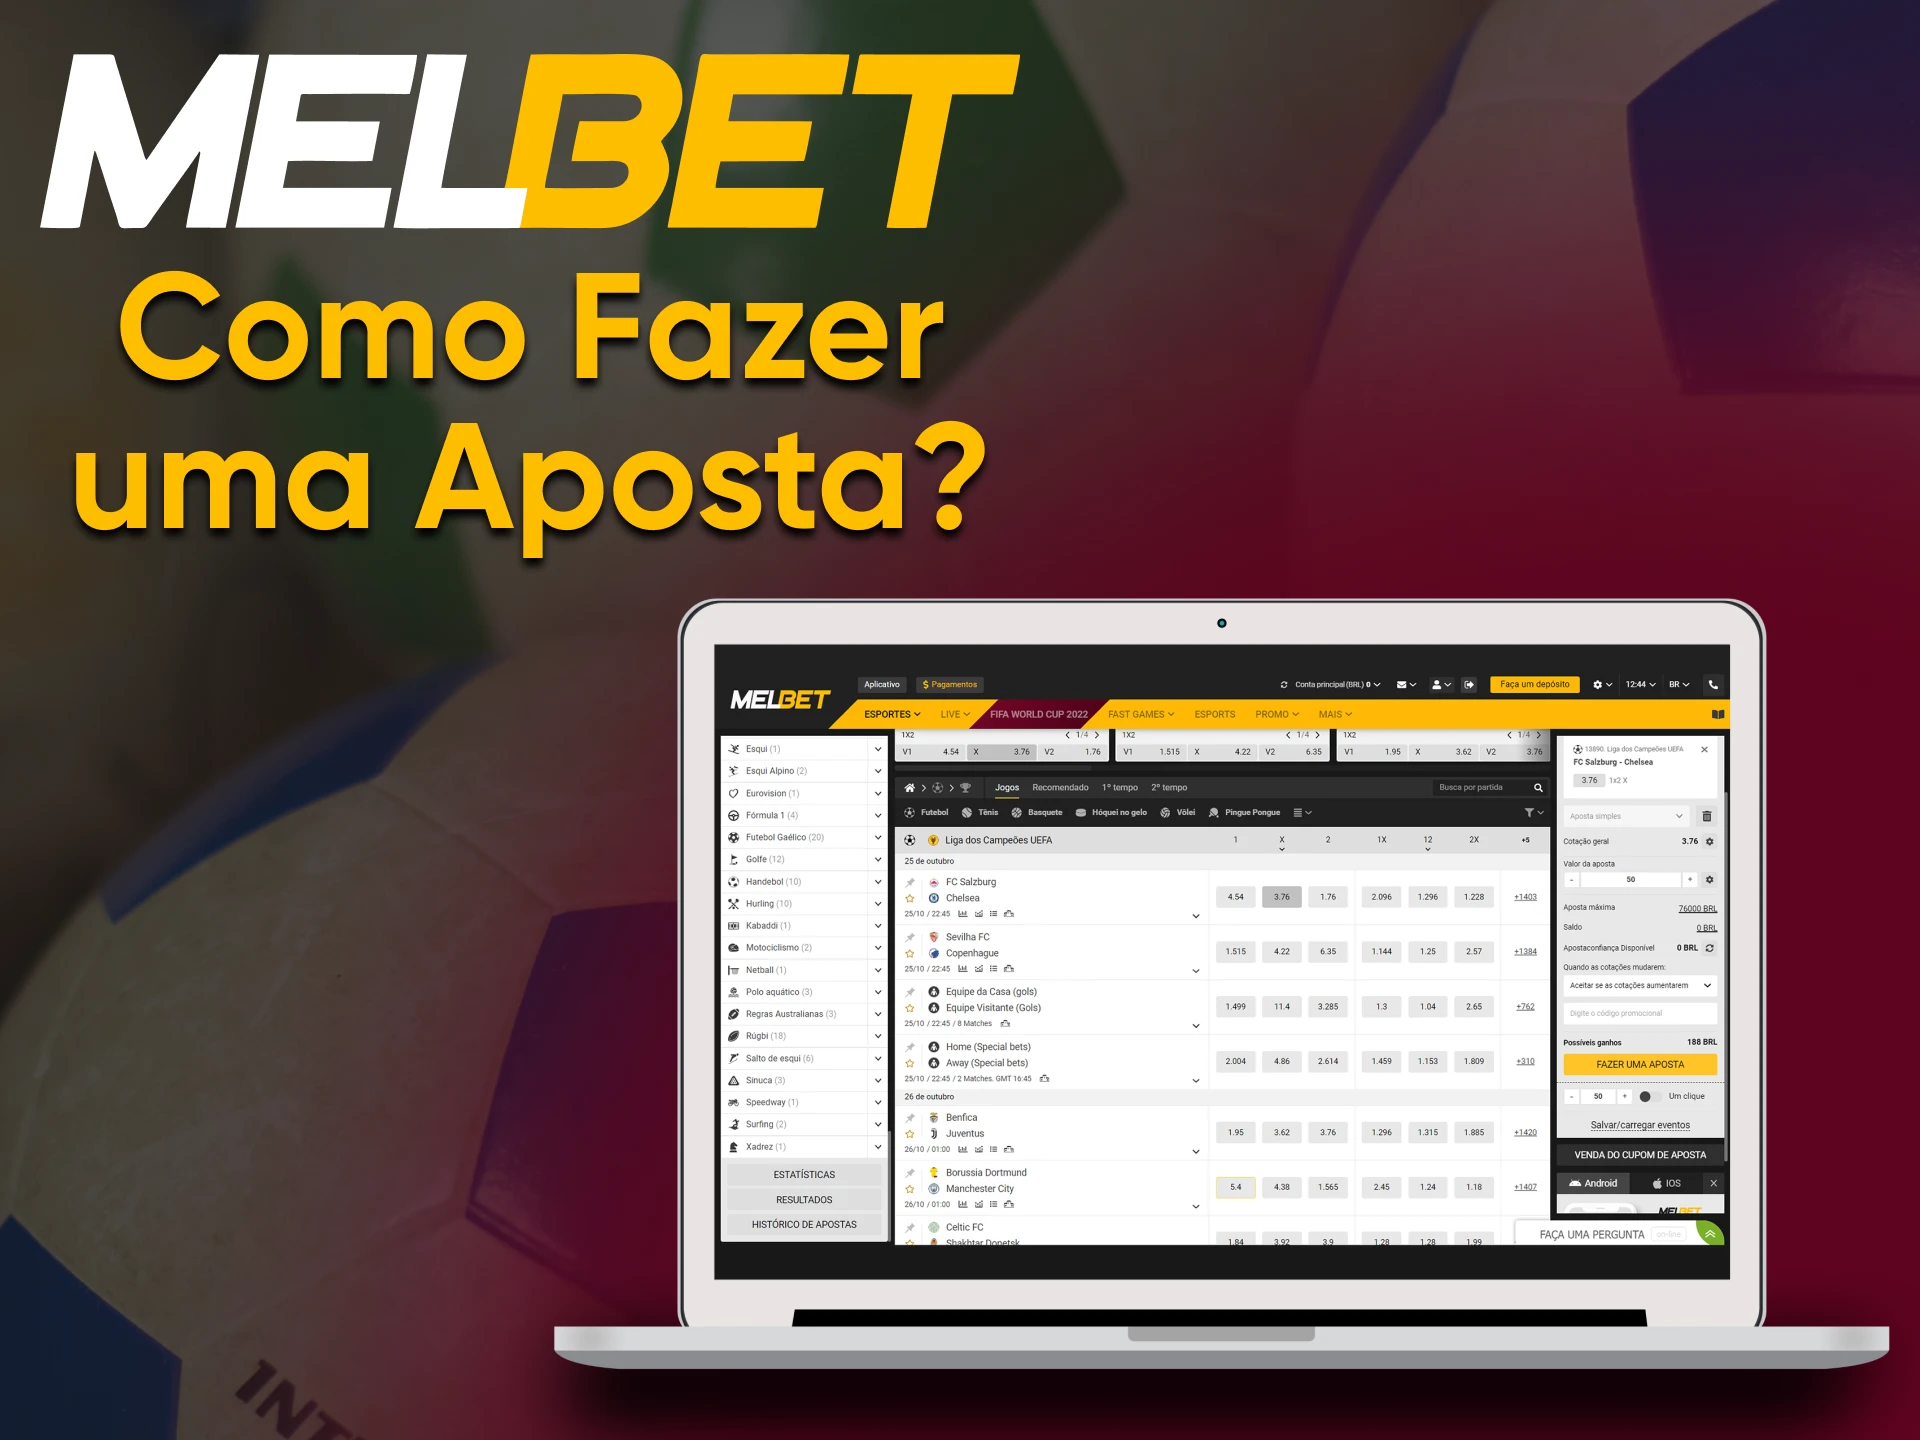 On the Melbet website, you can place bets.